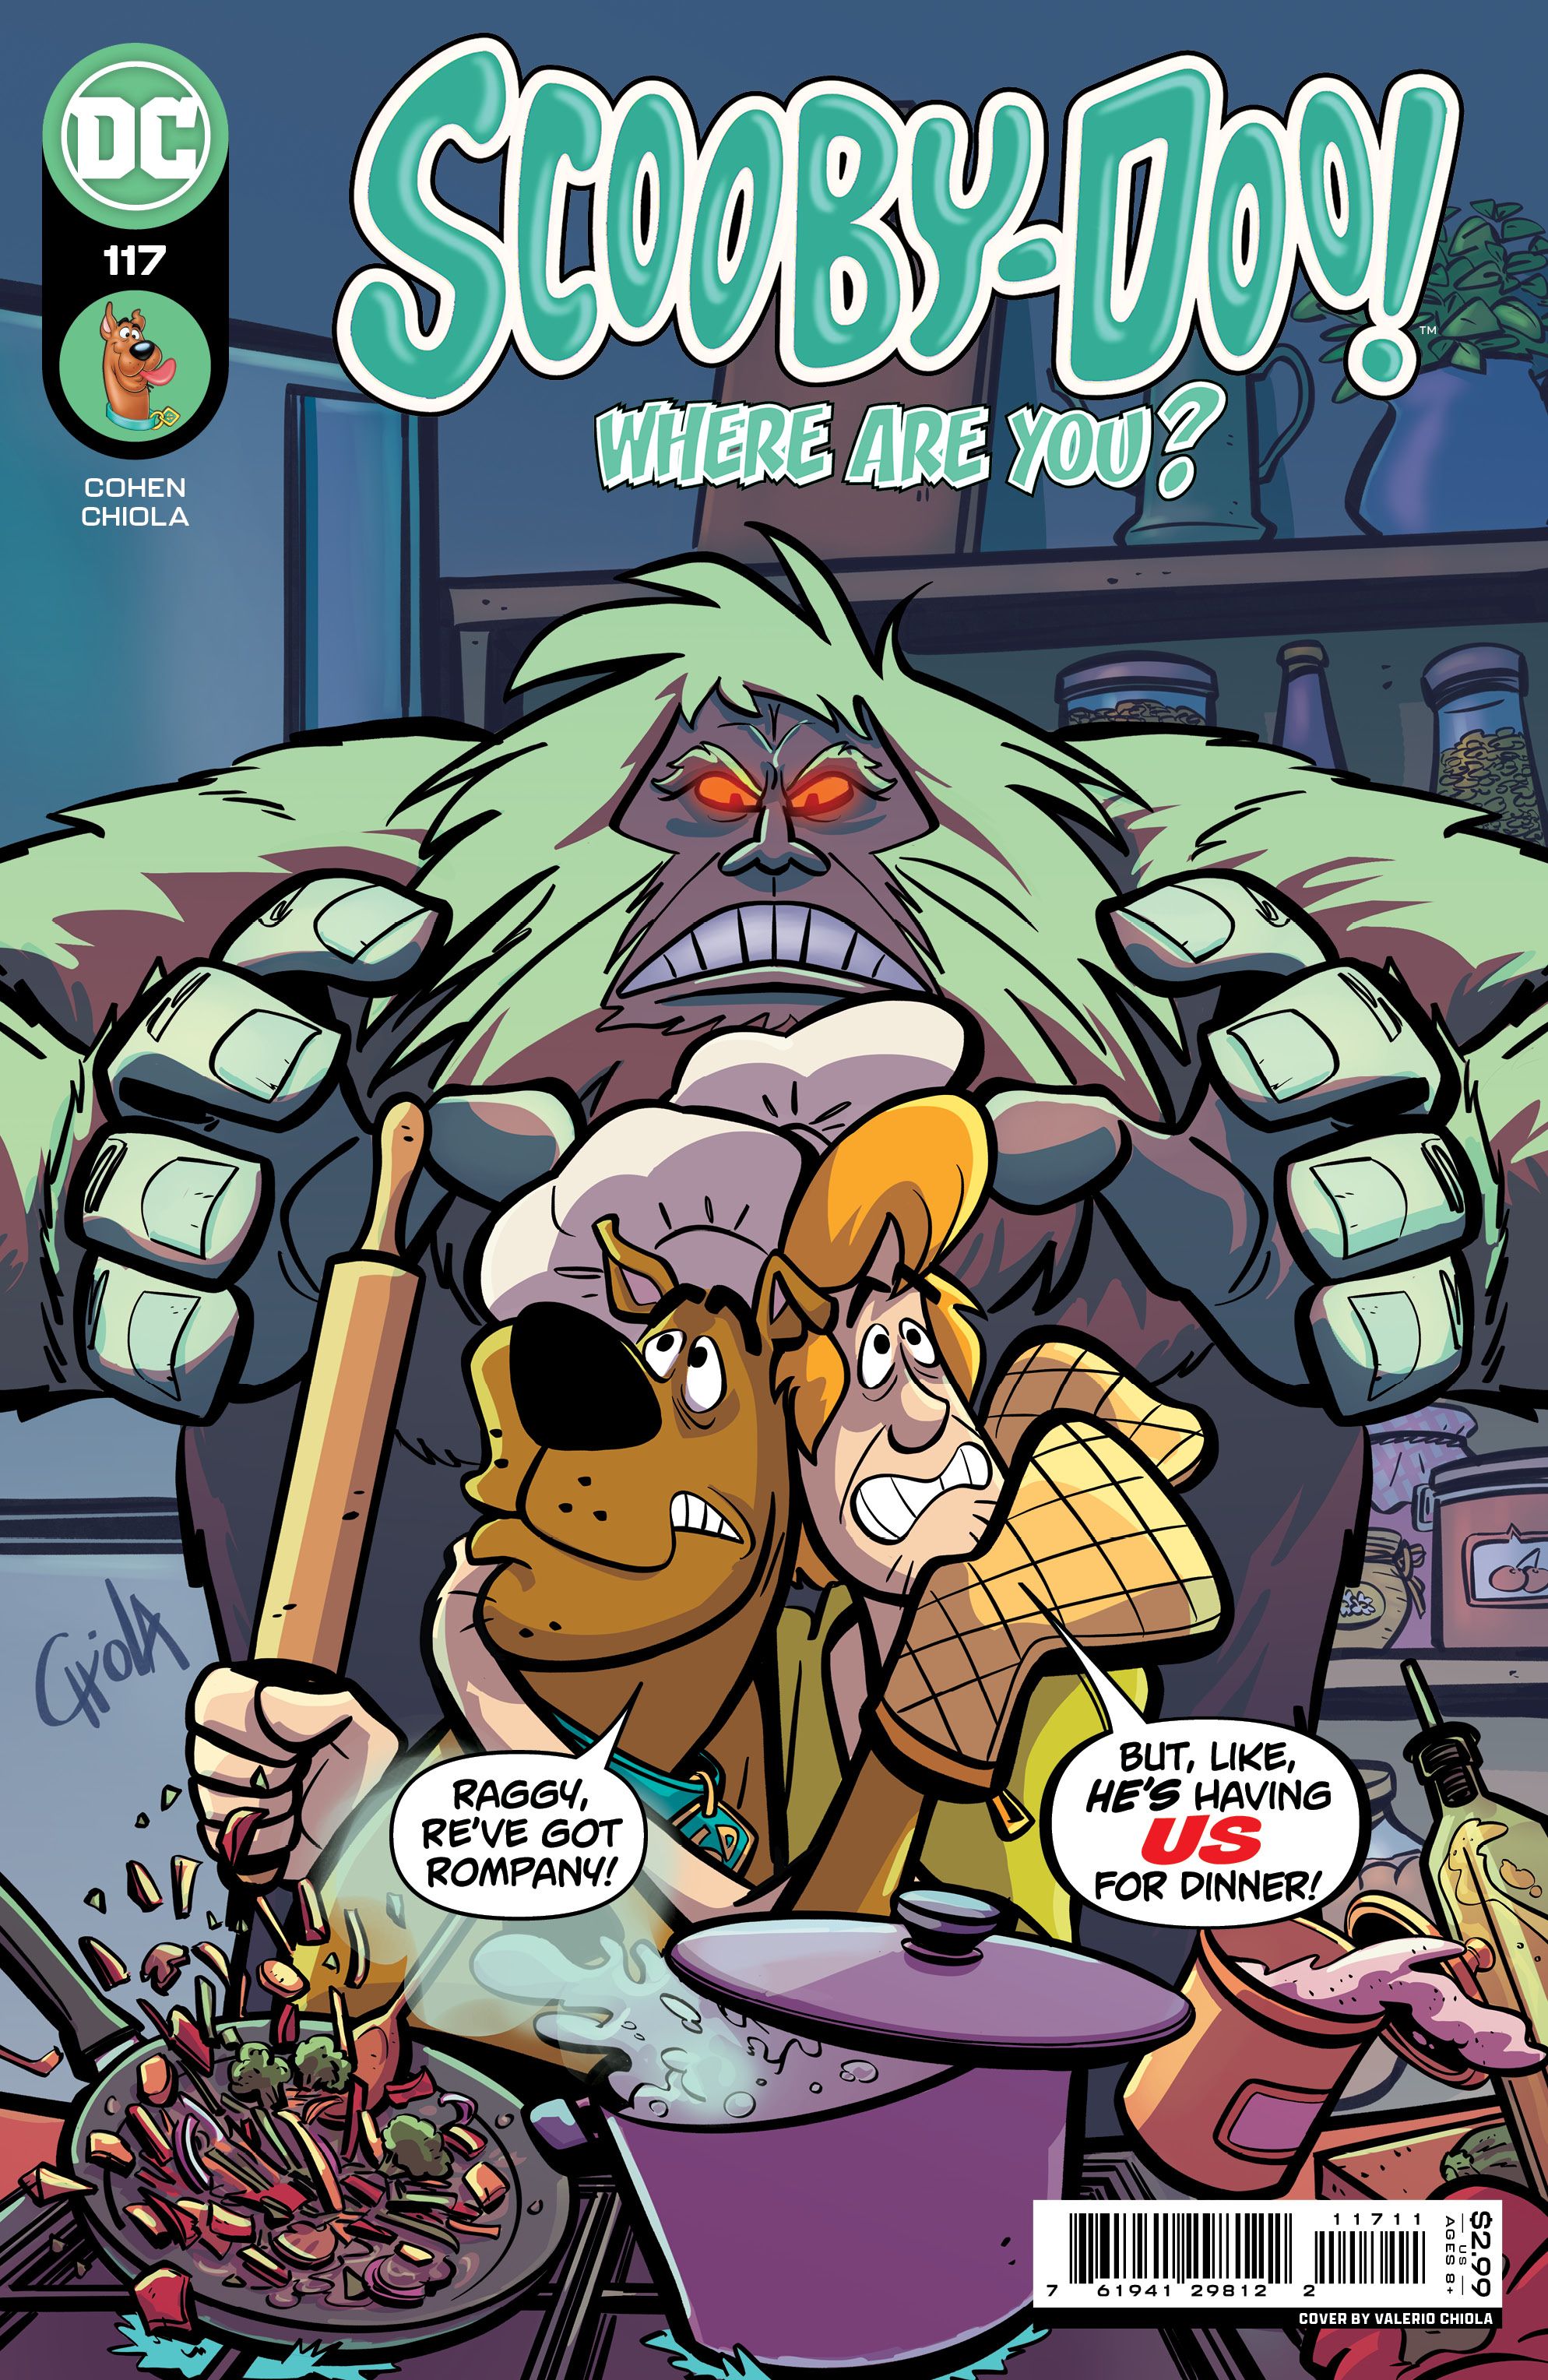 Scooby-Doo, Where Are You? #117 Comic